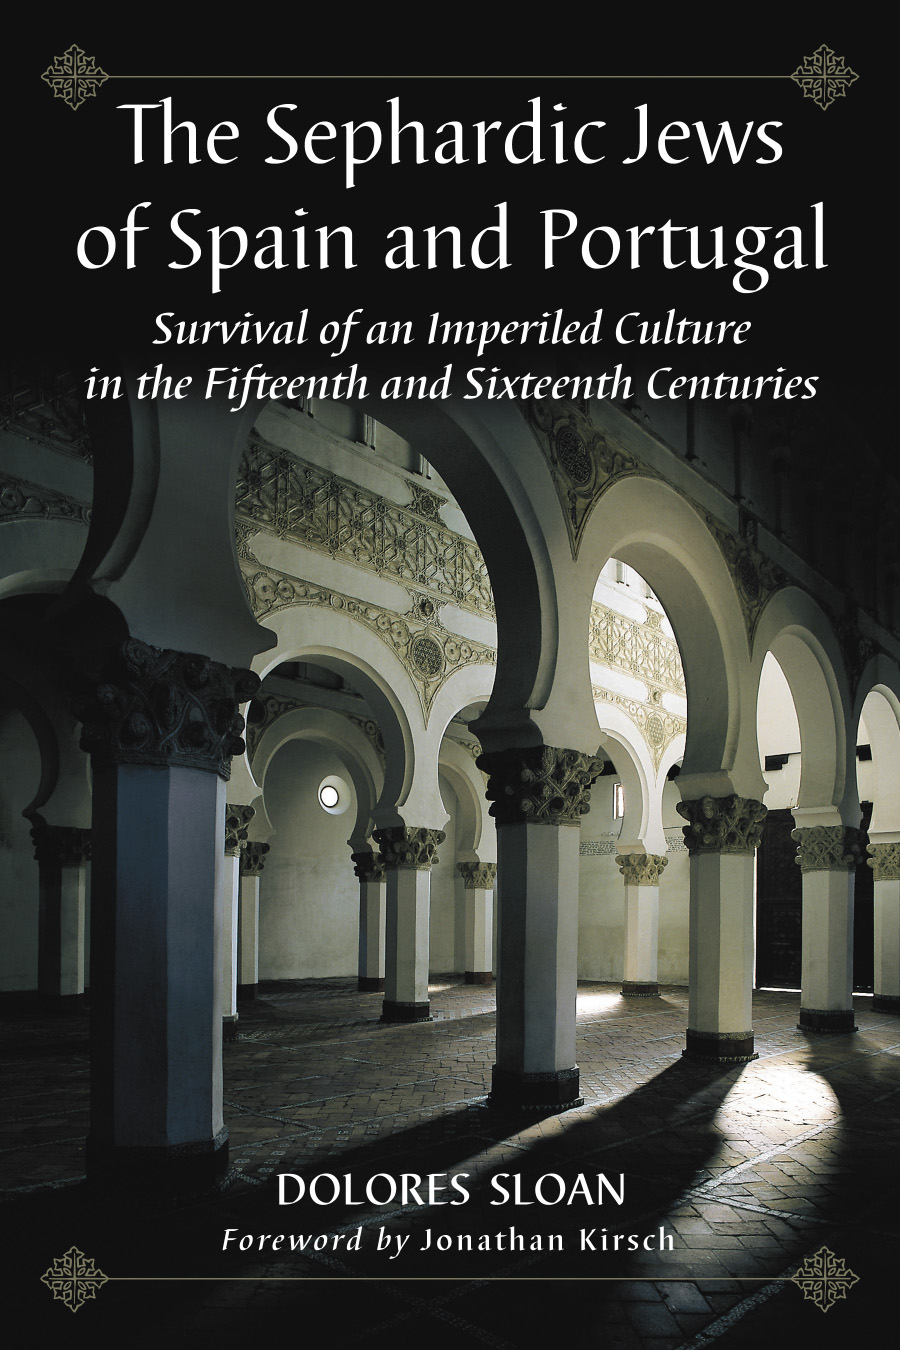 The Sephardic Jews of Spain and Portugal - book cover